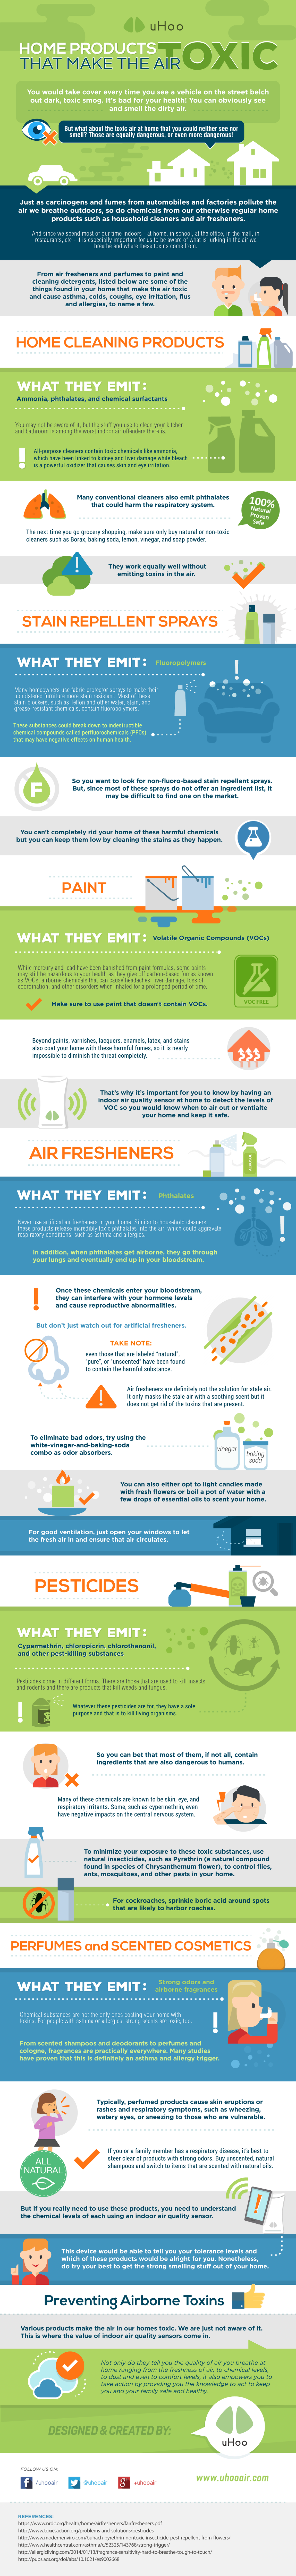 Home-Products-that-Make-the-Air-Toxic